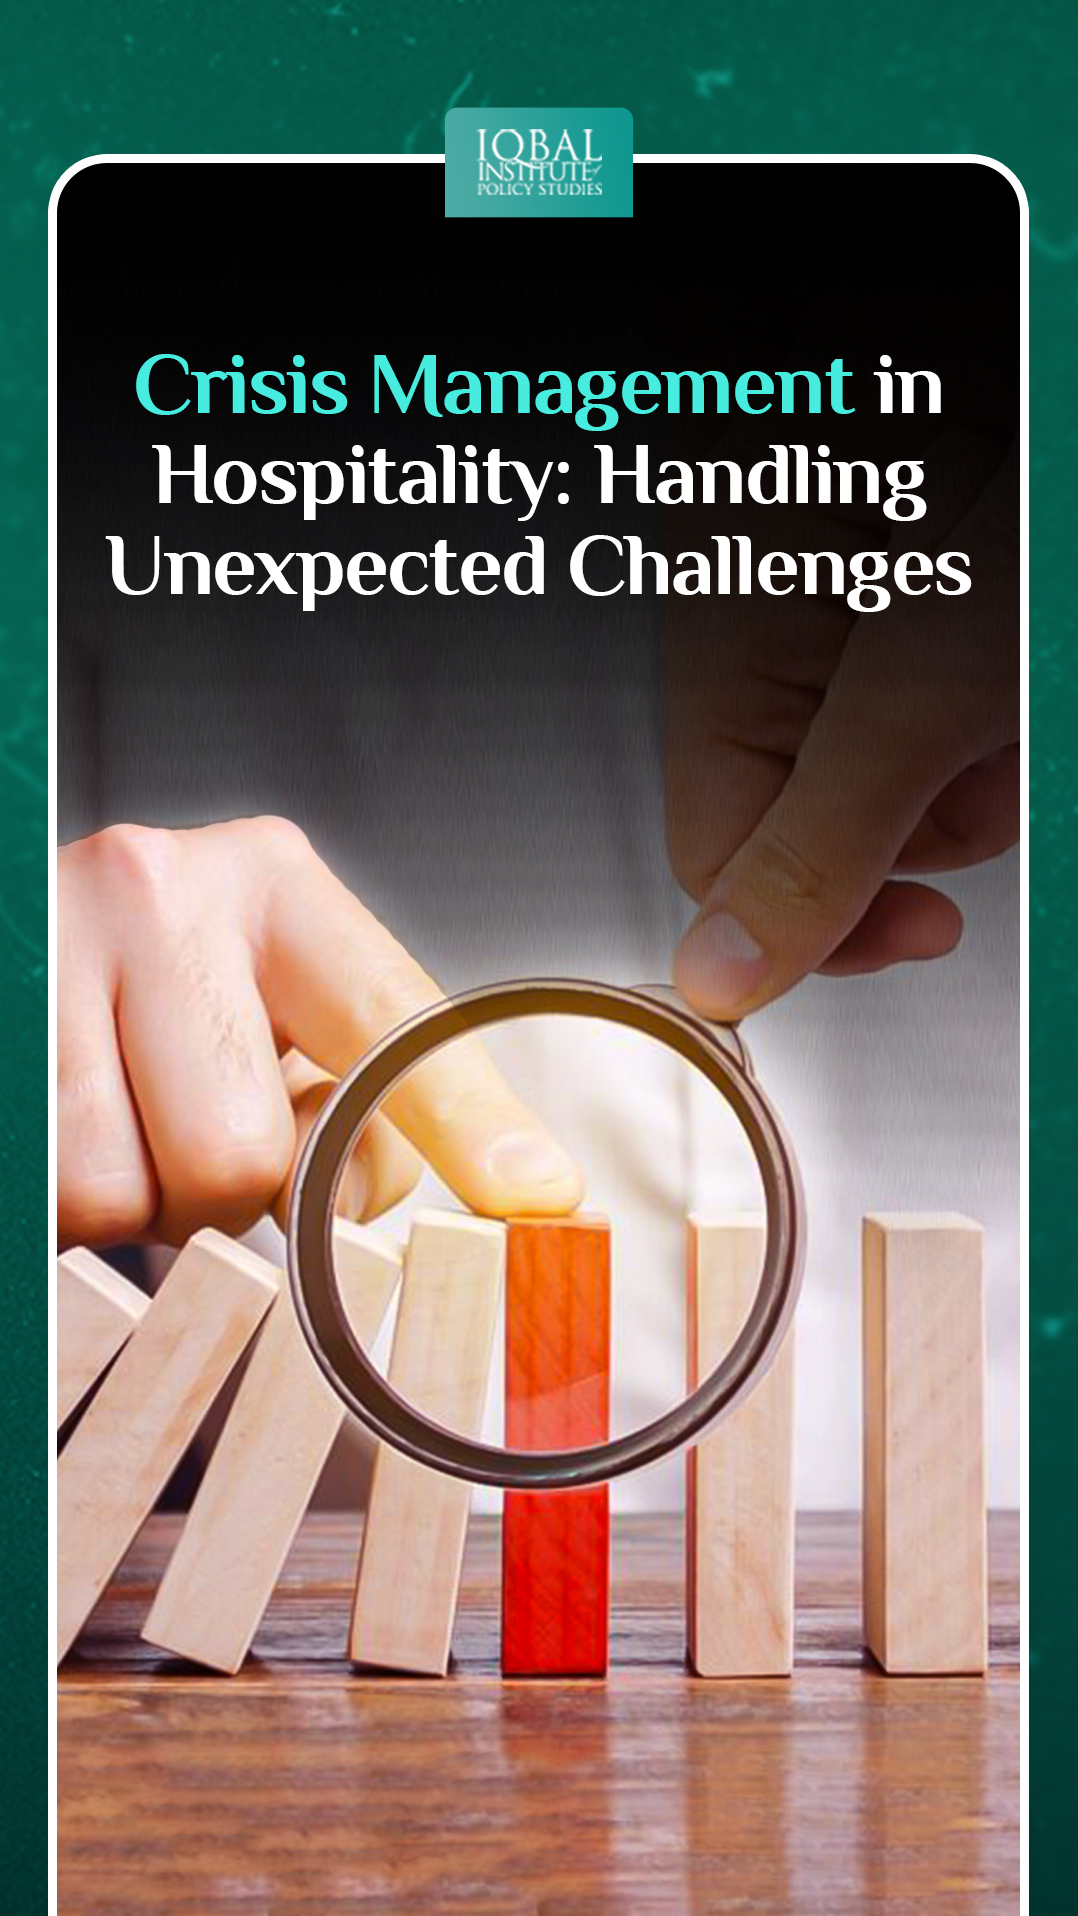 Crisis Management in Hospitality: Handling Unexpected Challenges